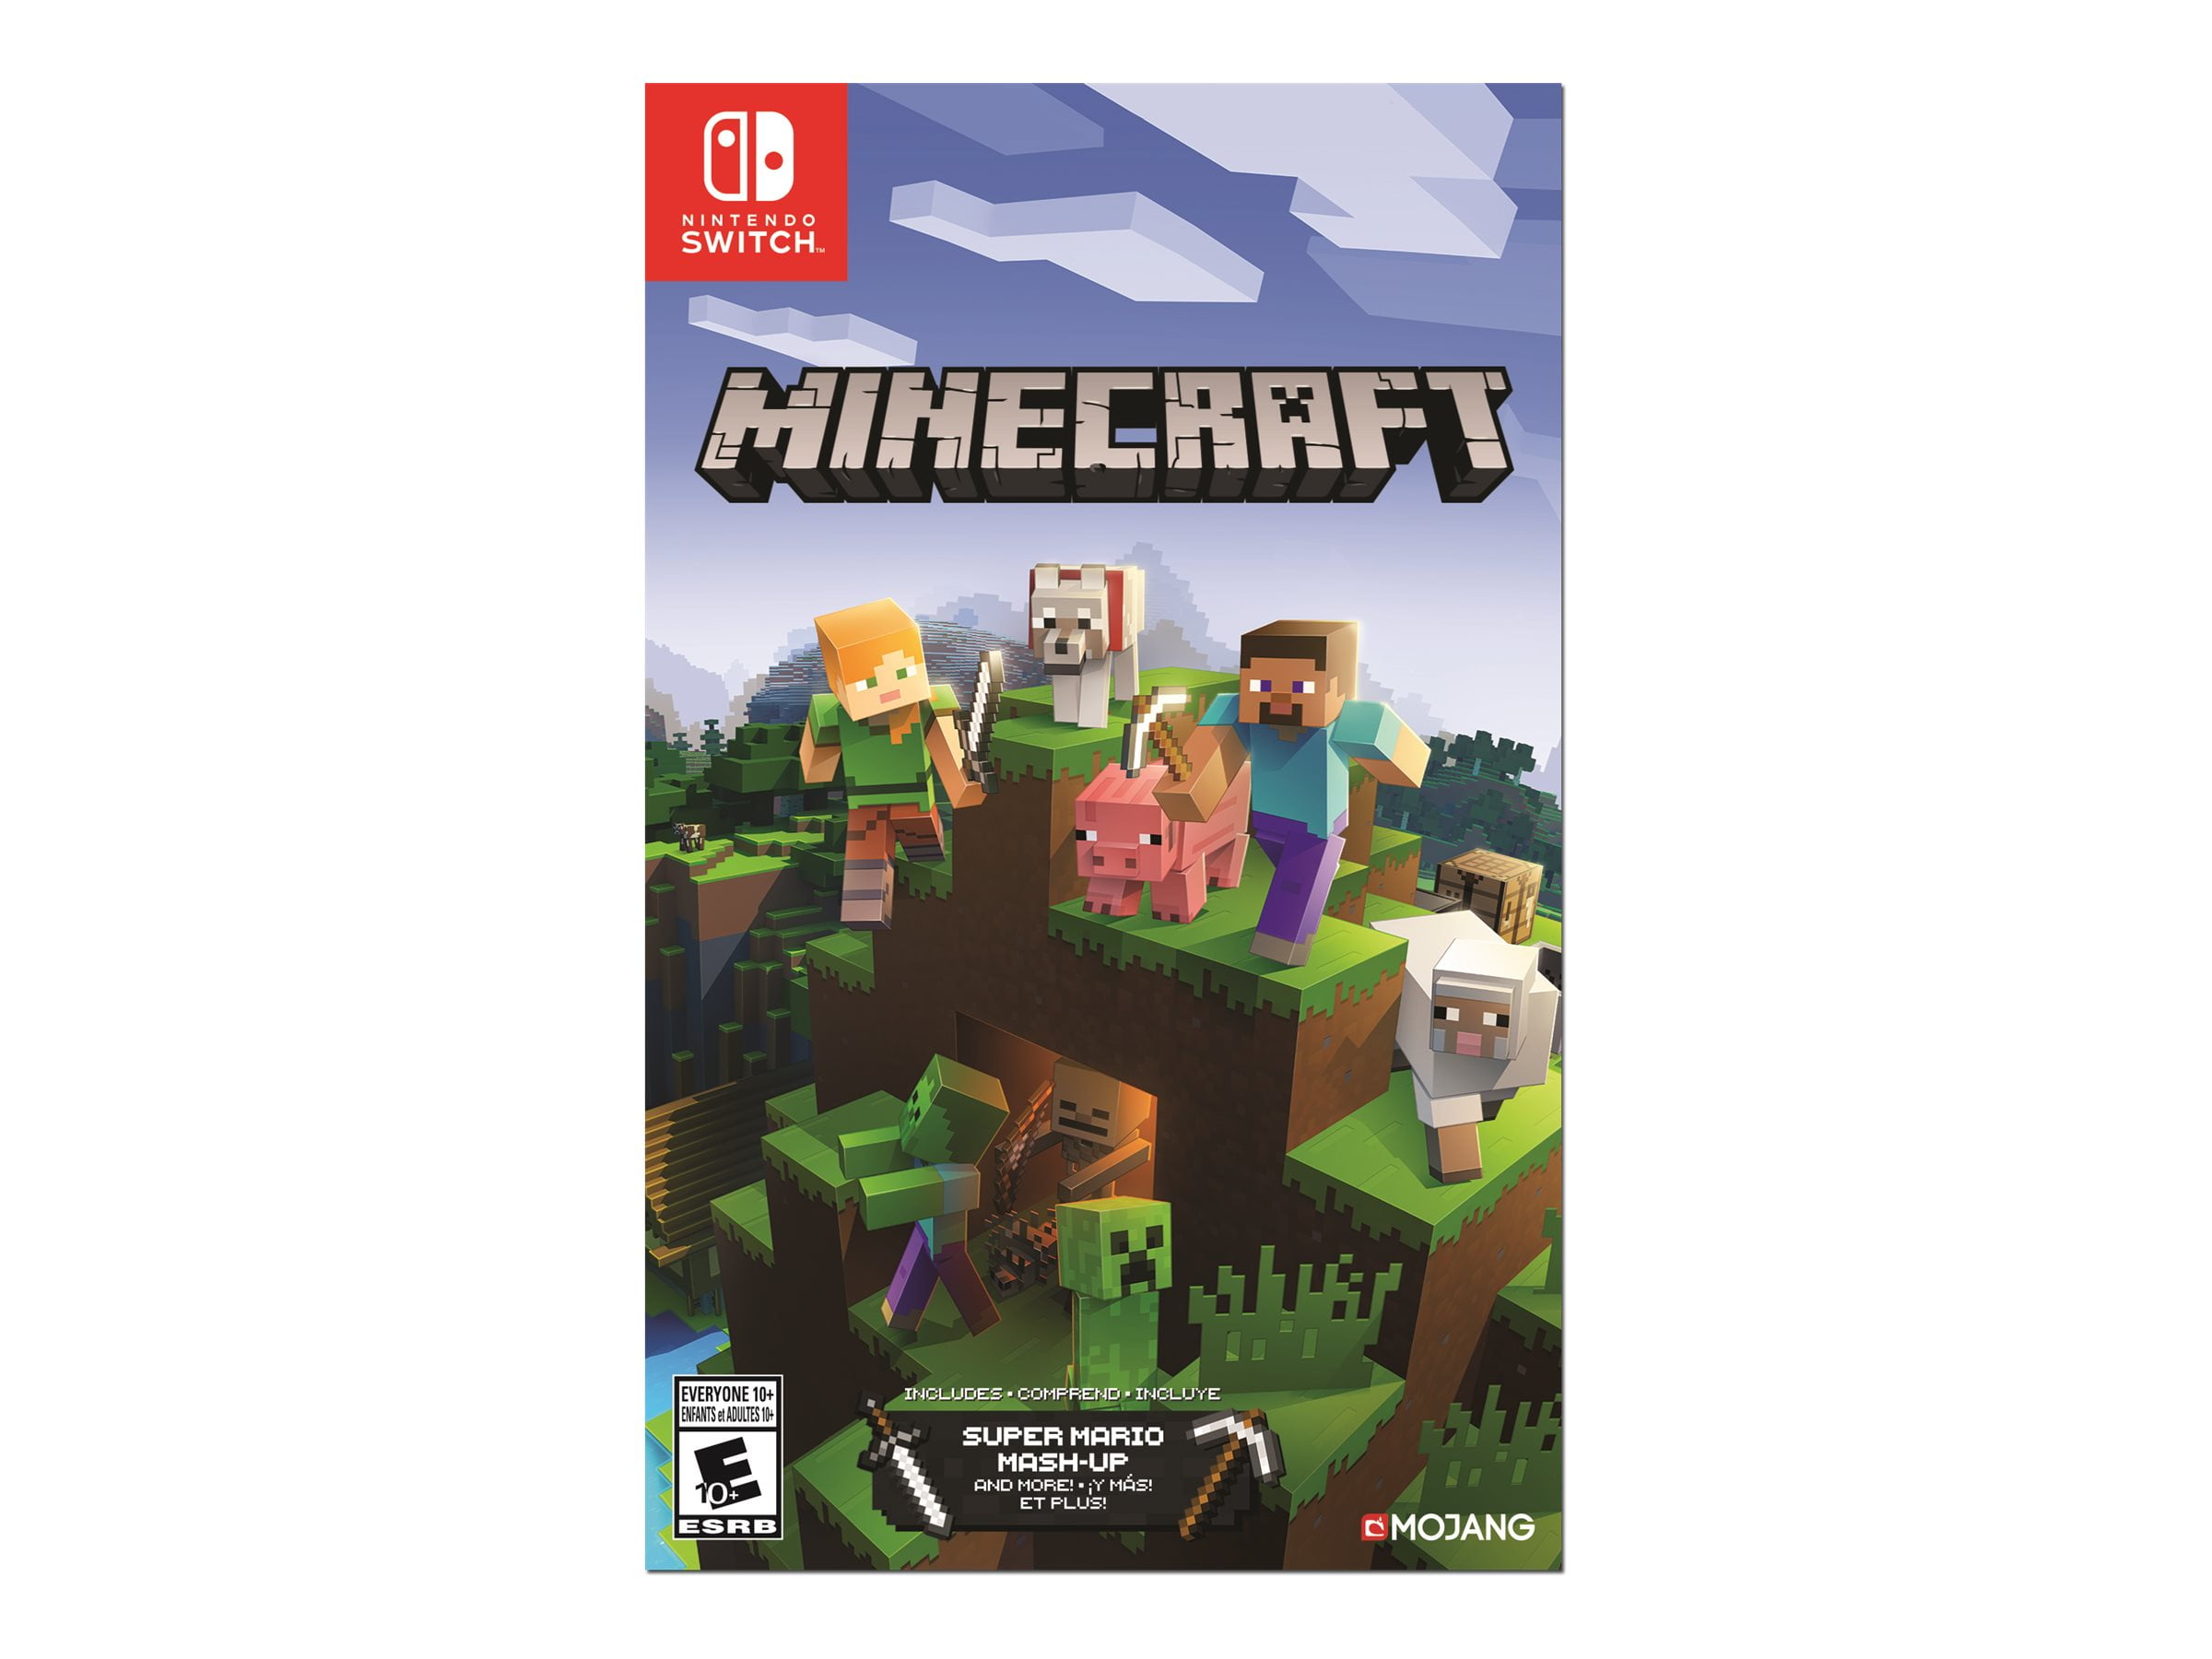 Minecraft Story Mode Season 2 Launches November 6 For Switch – NintendoSoup